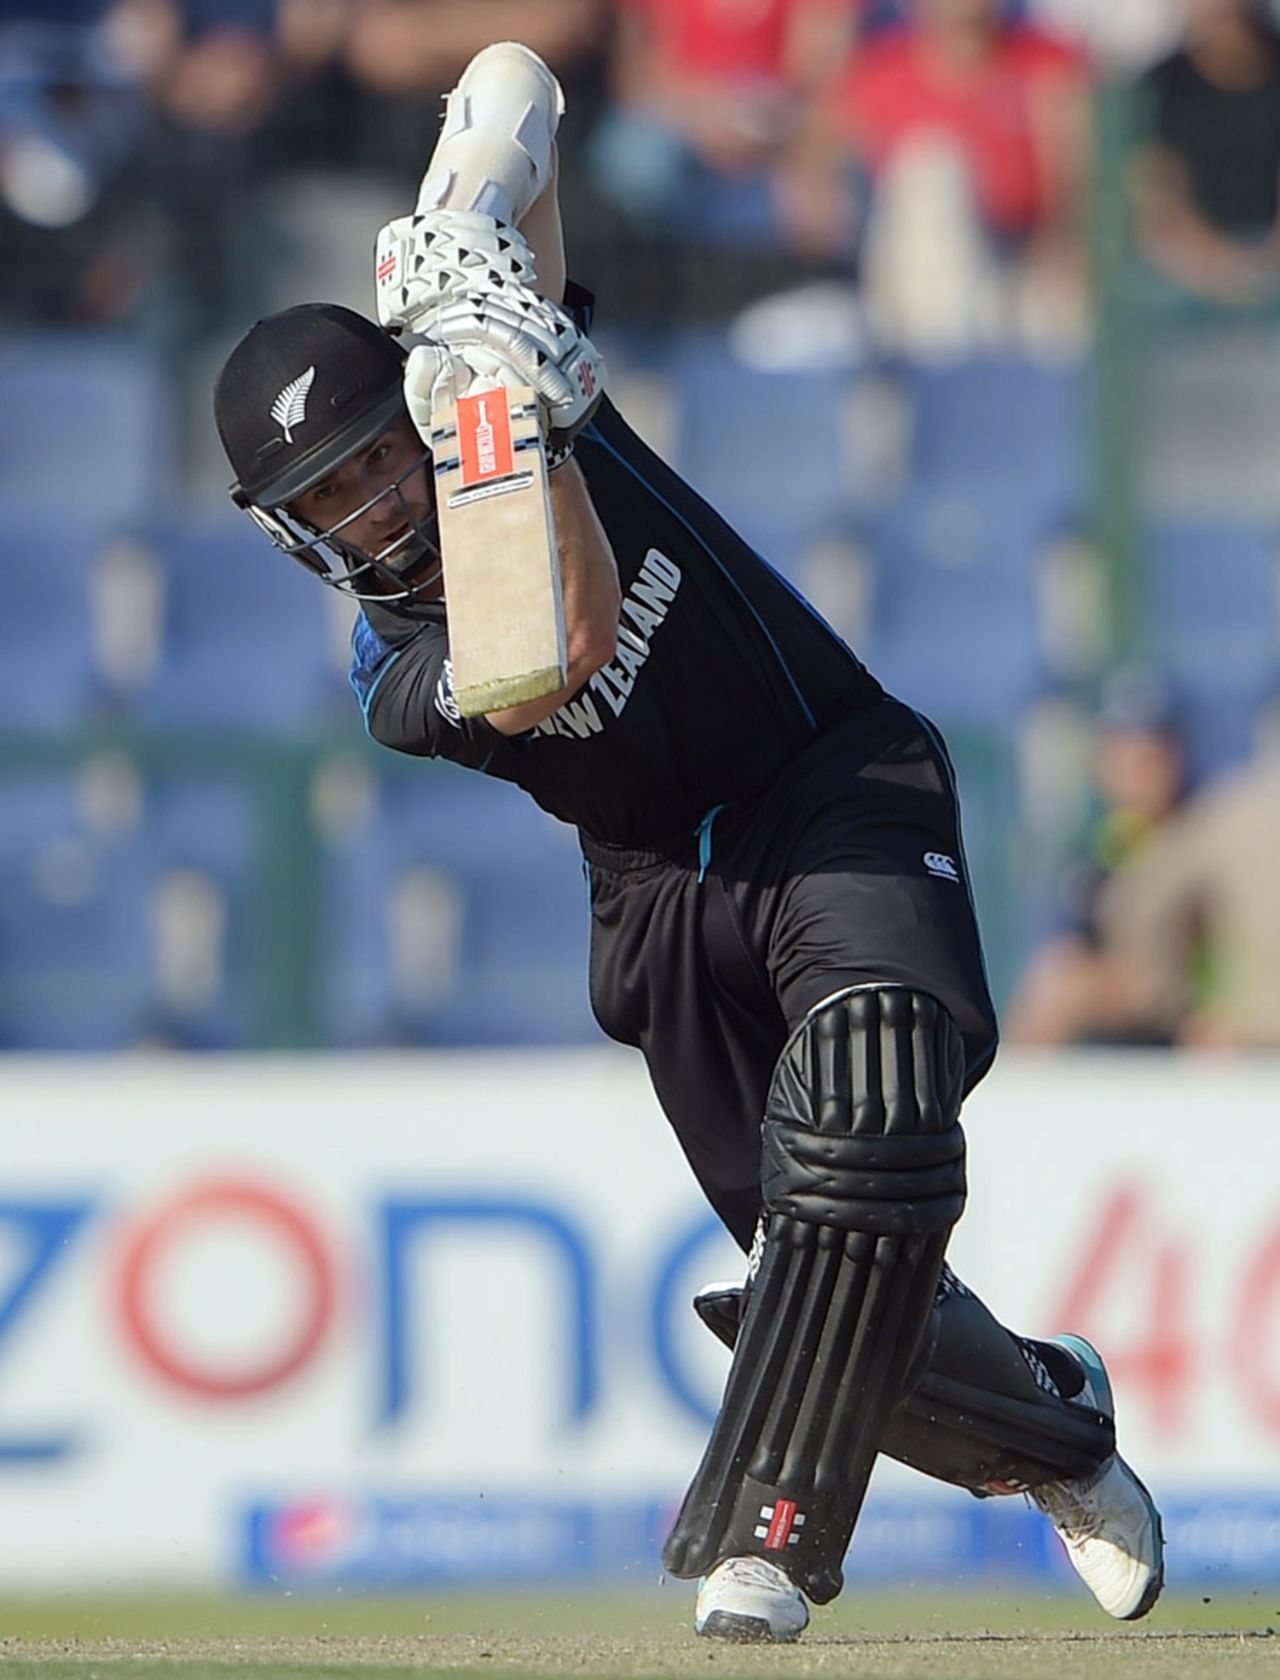 Kane Williamson collected yet another fifty, Pakistan v New Zealand, 5th ODI, Abu Dhabi, December 19, 2014